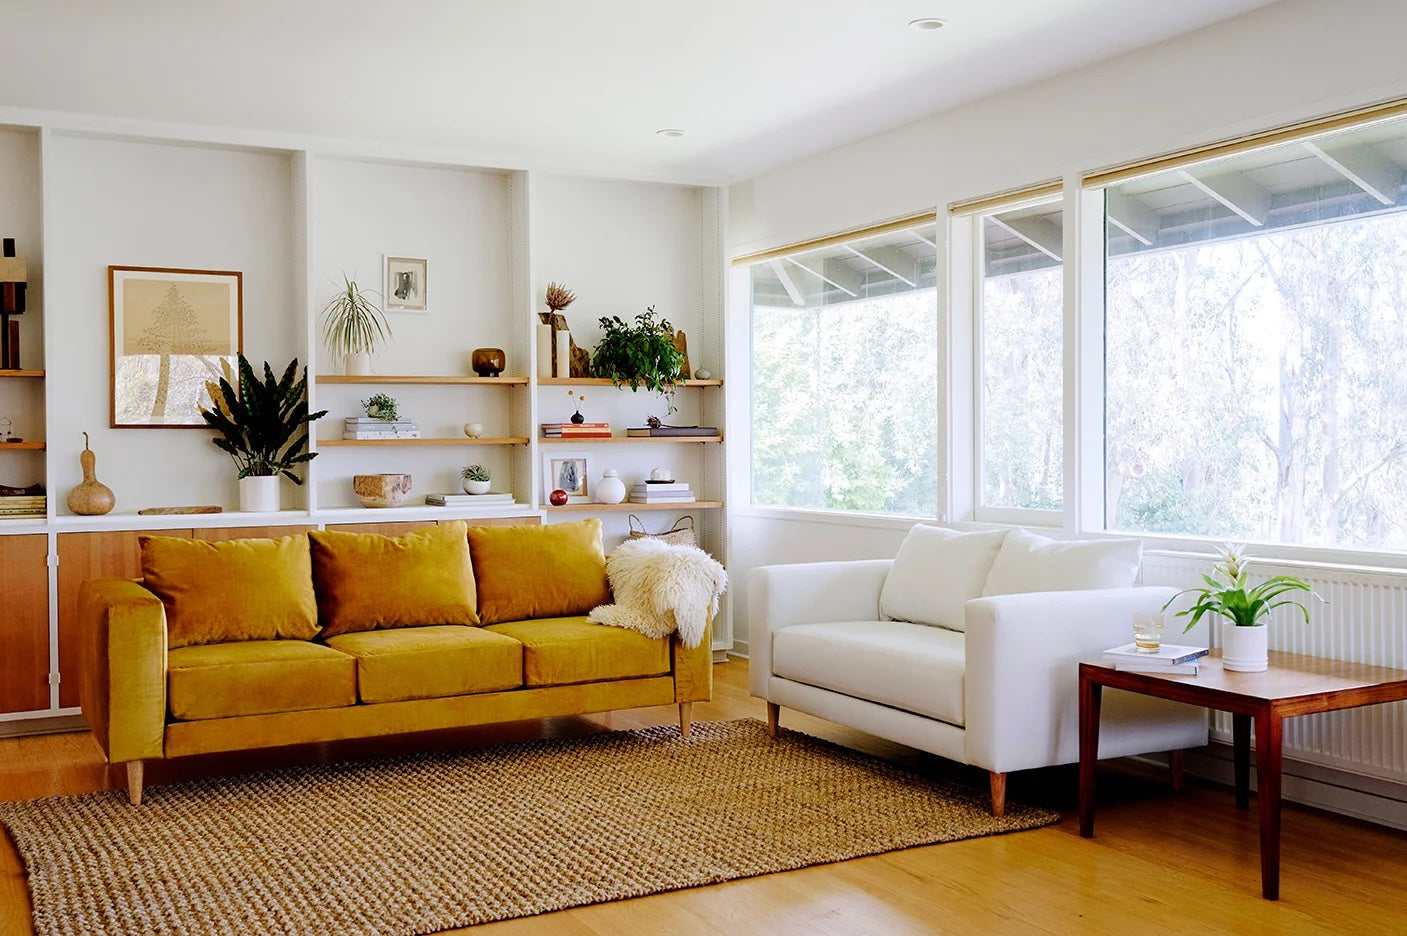 A bright, modern living room with a mustard-yellow couch and a white armchair on a jute rug. A wooden side table with a potted plant sits next to the armchair. Shelves with books, plants, and decor adorn the white walls. Large windows let in ample natural light.